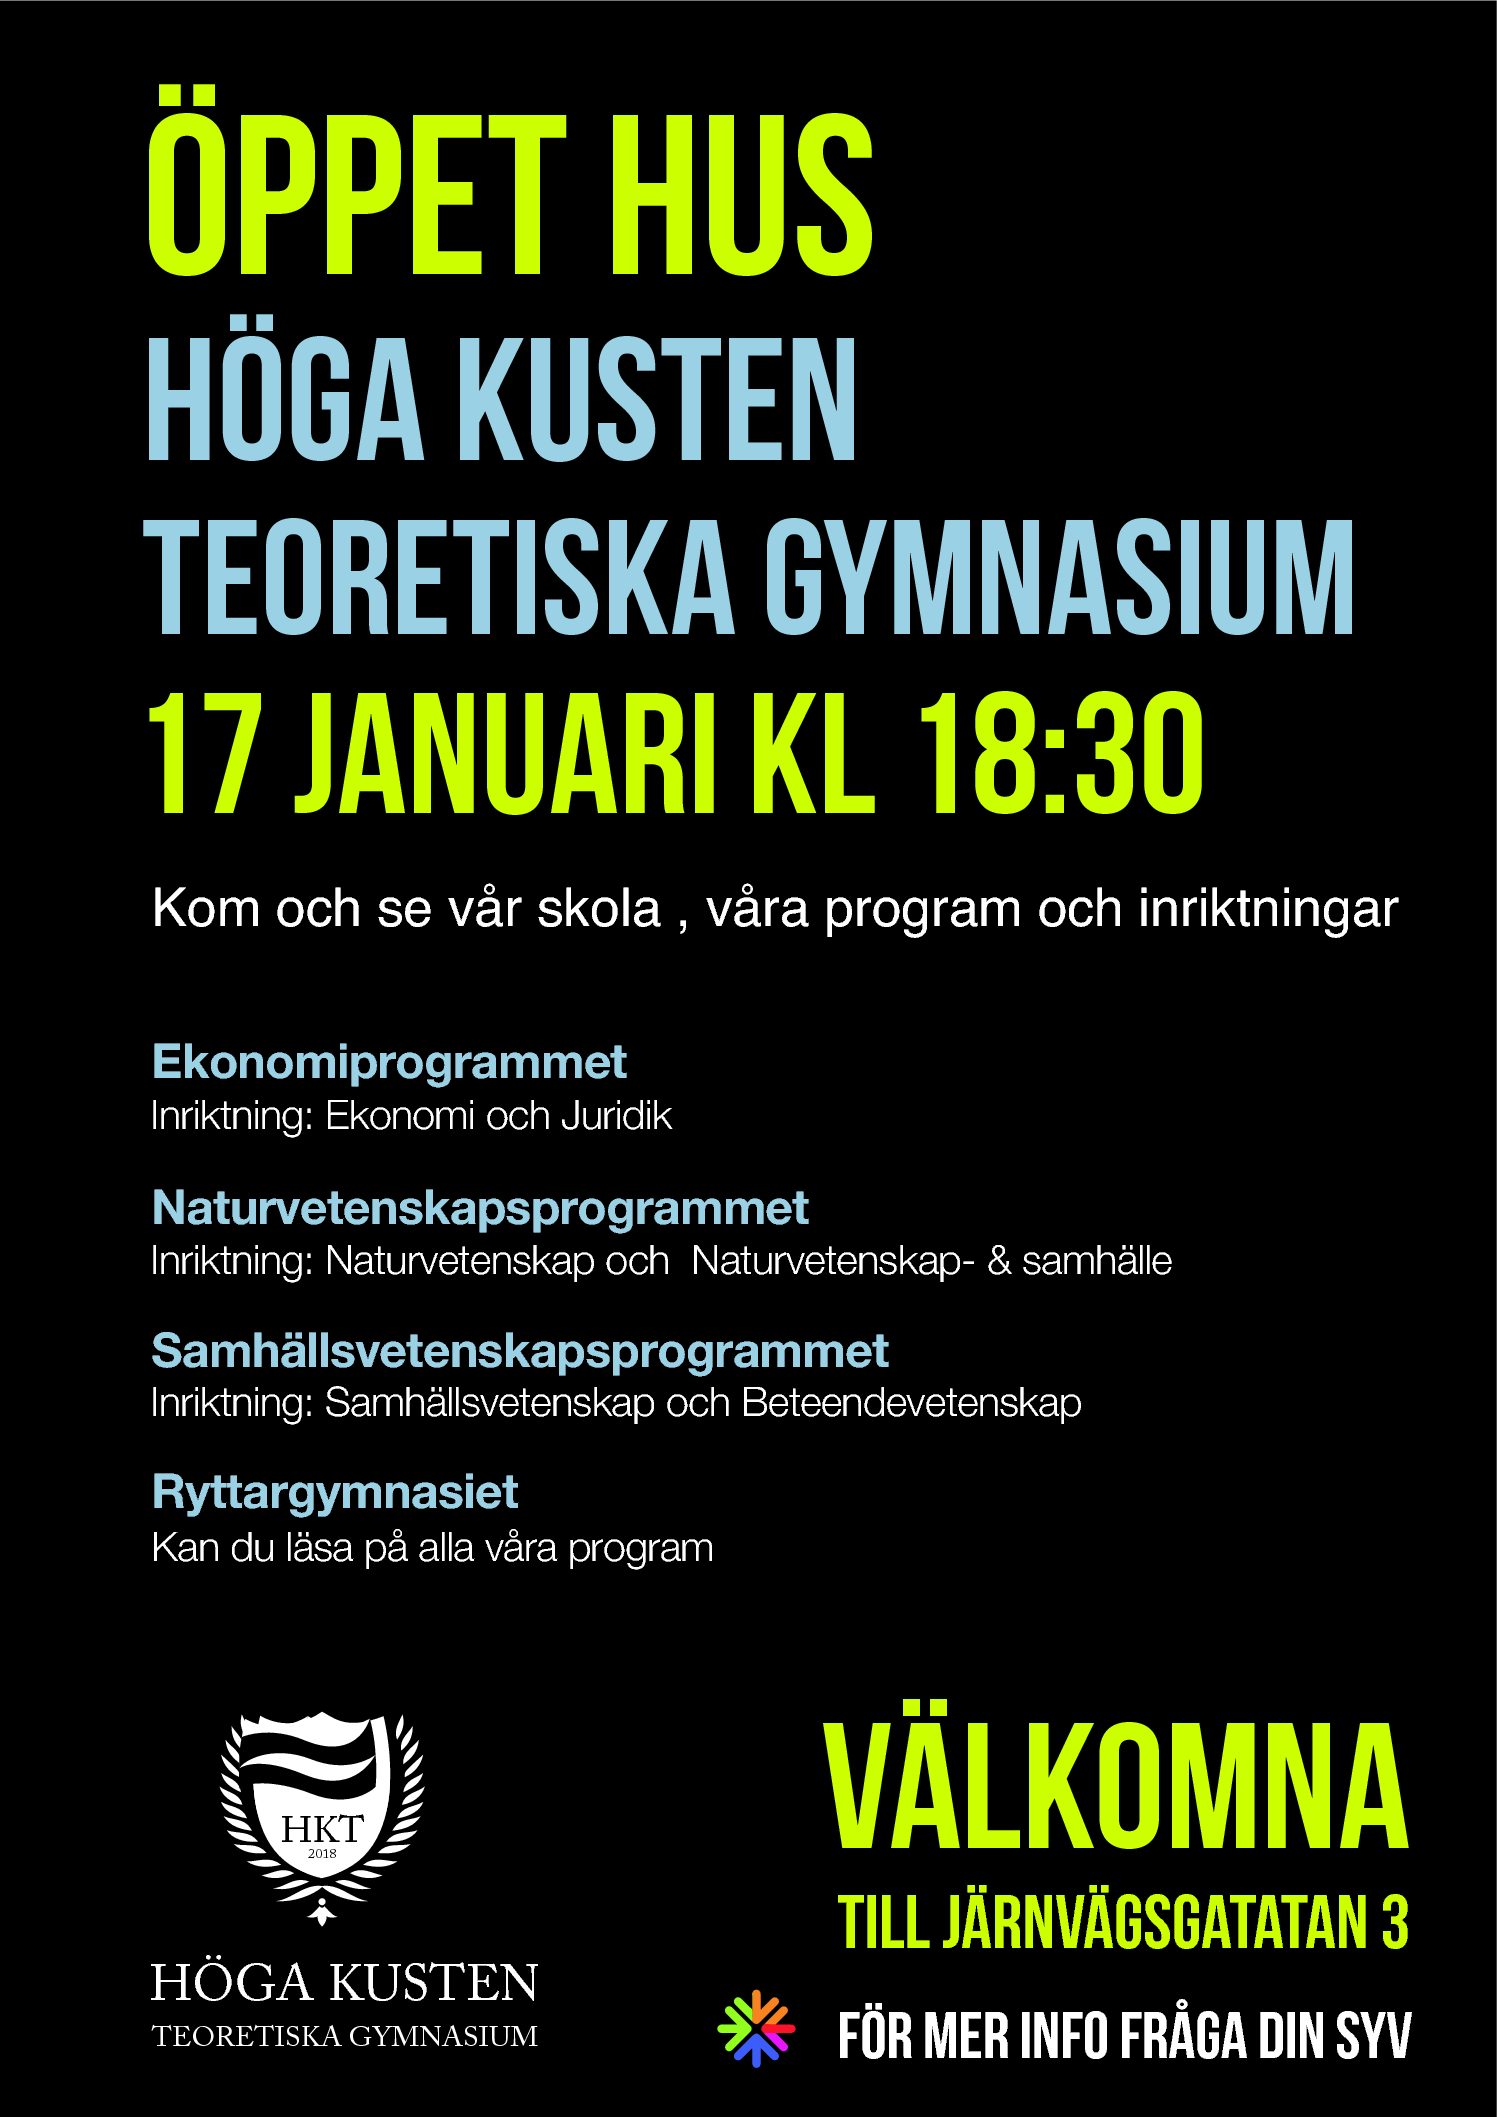 You are currently viewing Öppet hus 17 januari 18:30